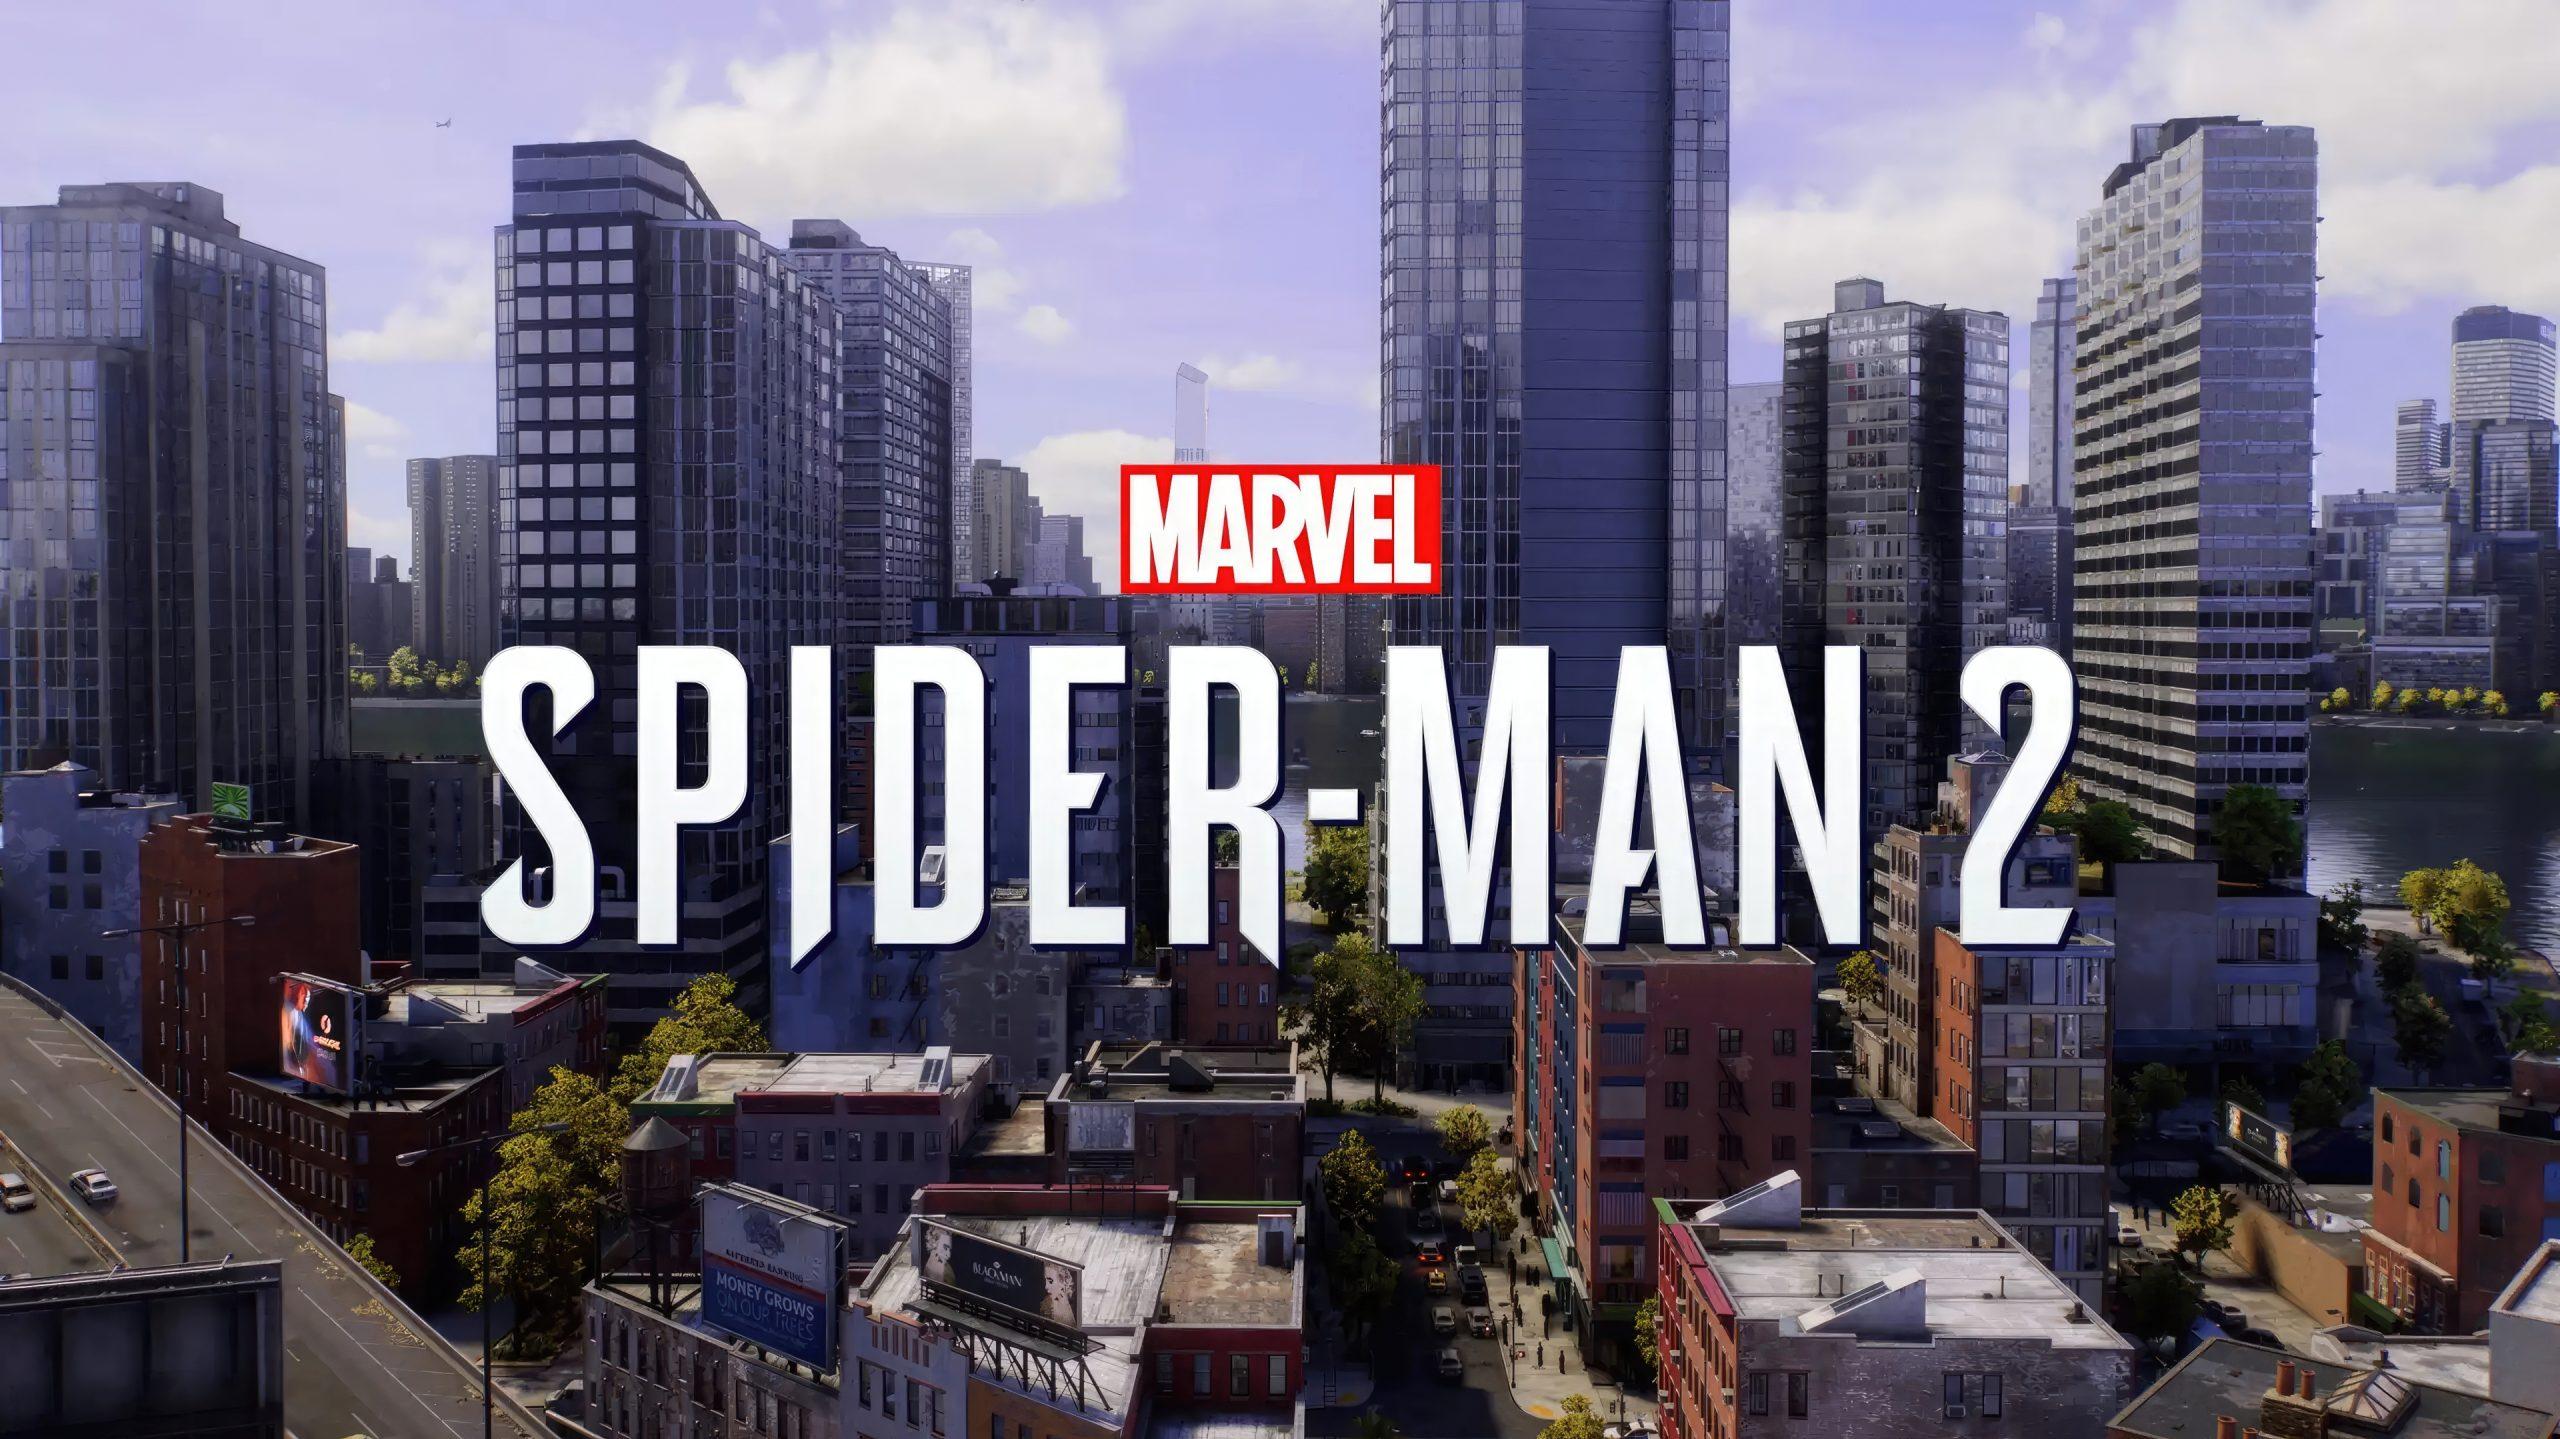 Marvel S Spider Man Shows Off Its 2x Bigger Nyc In New Trailer